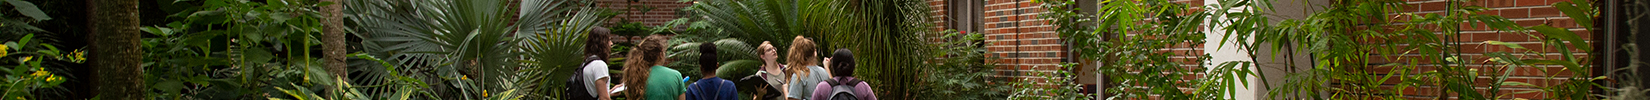 Undergraduate students in the Gardens of Fifield. 